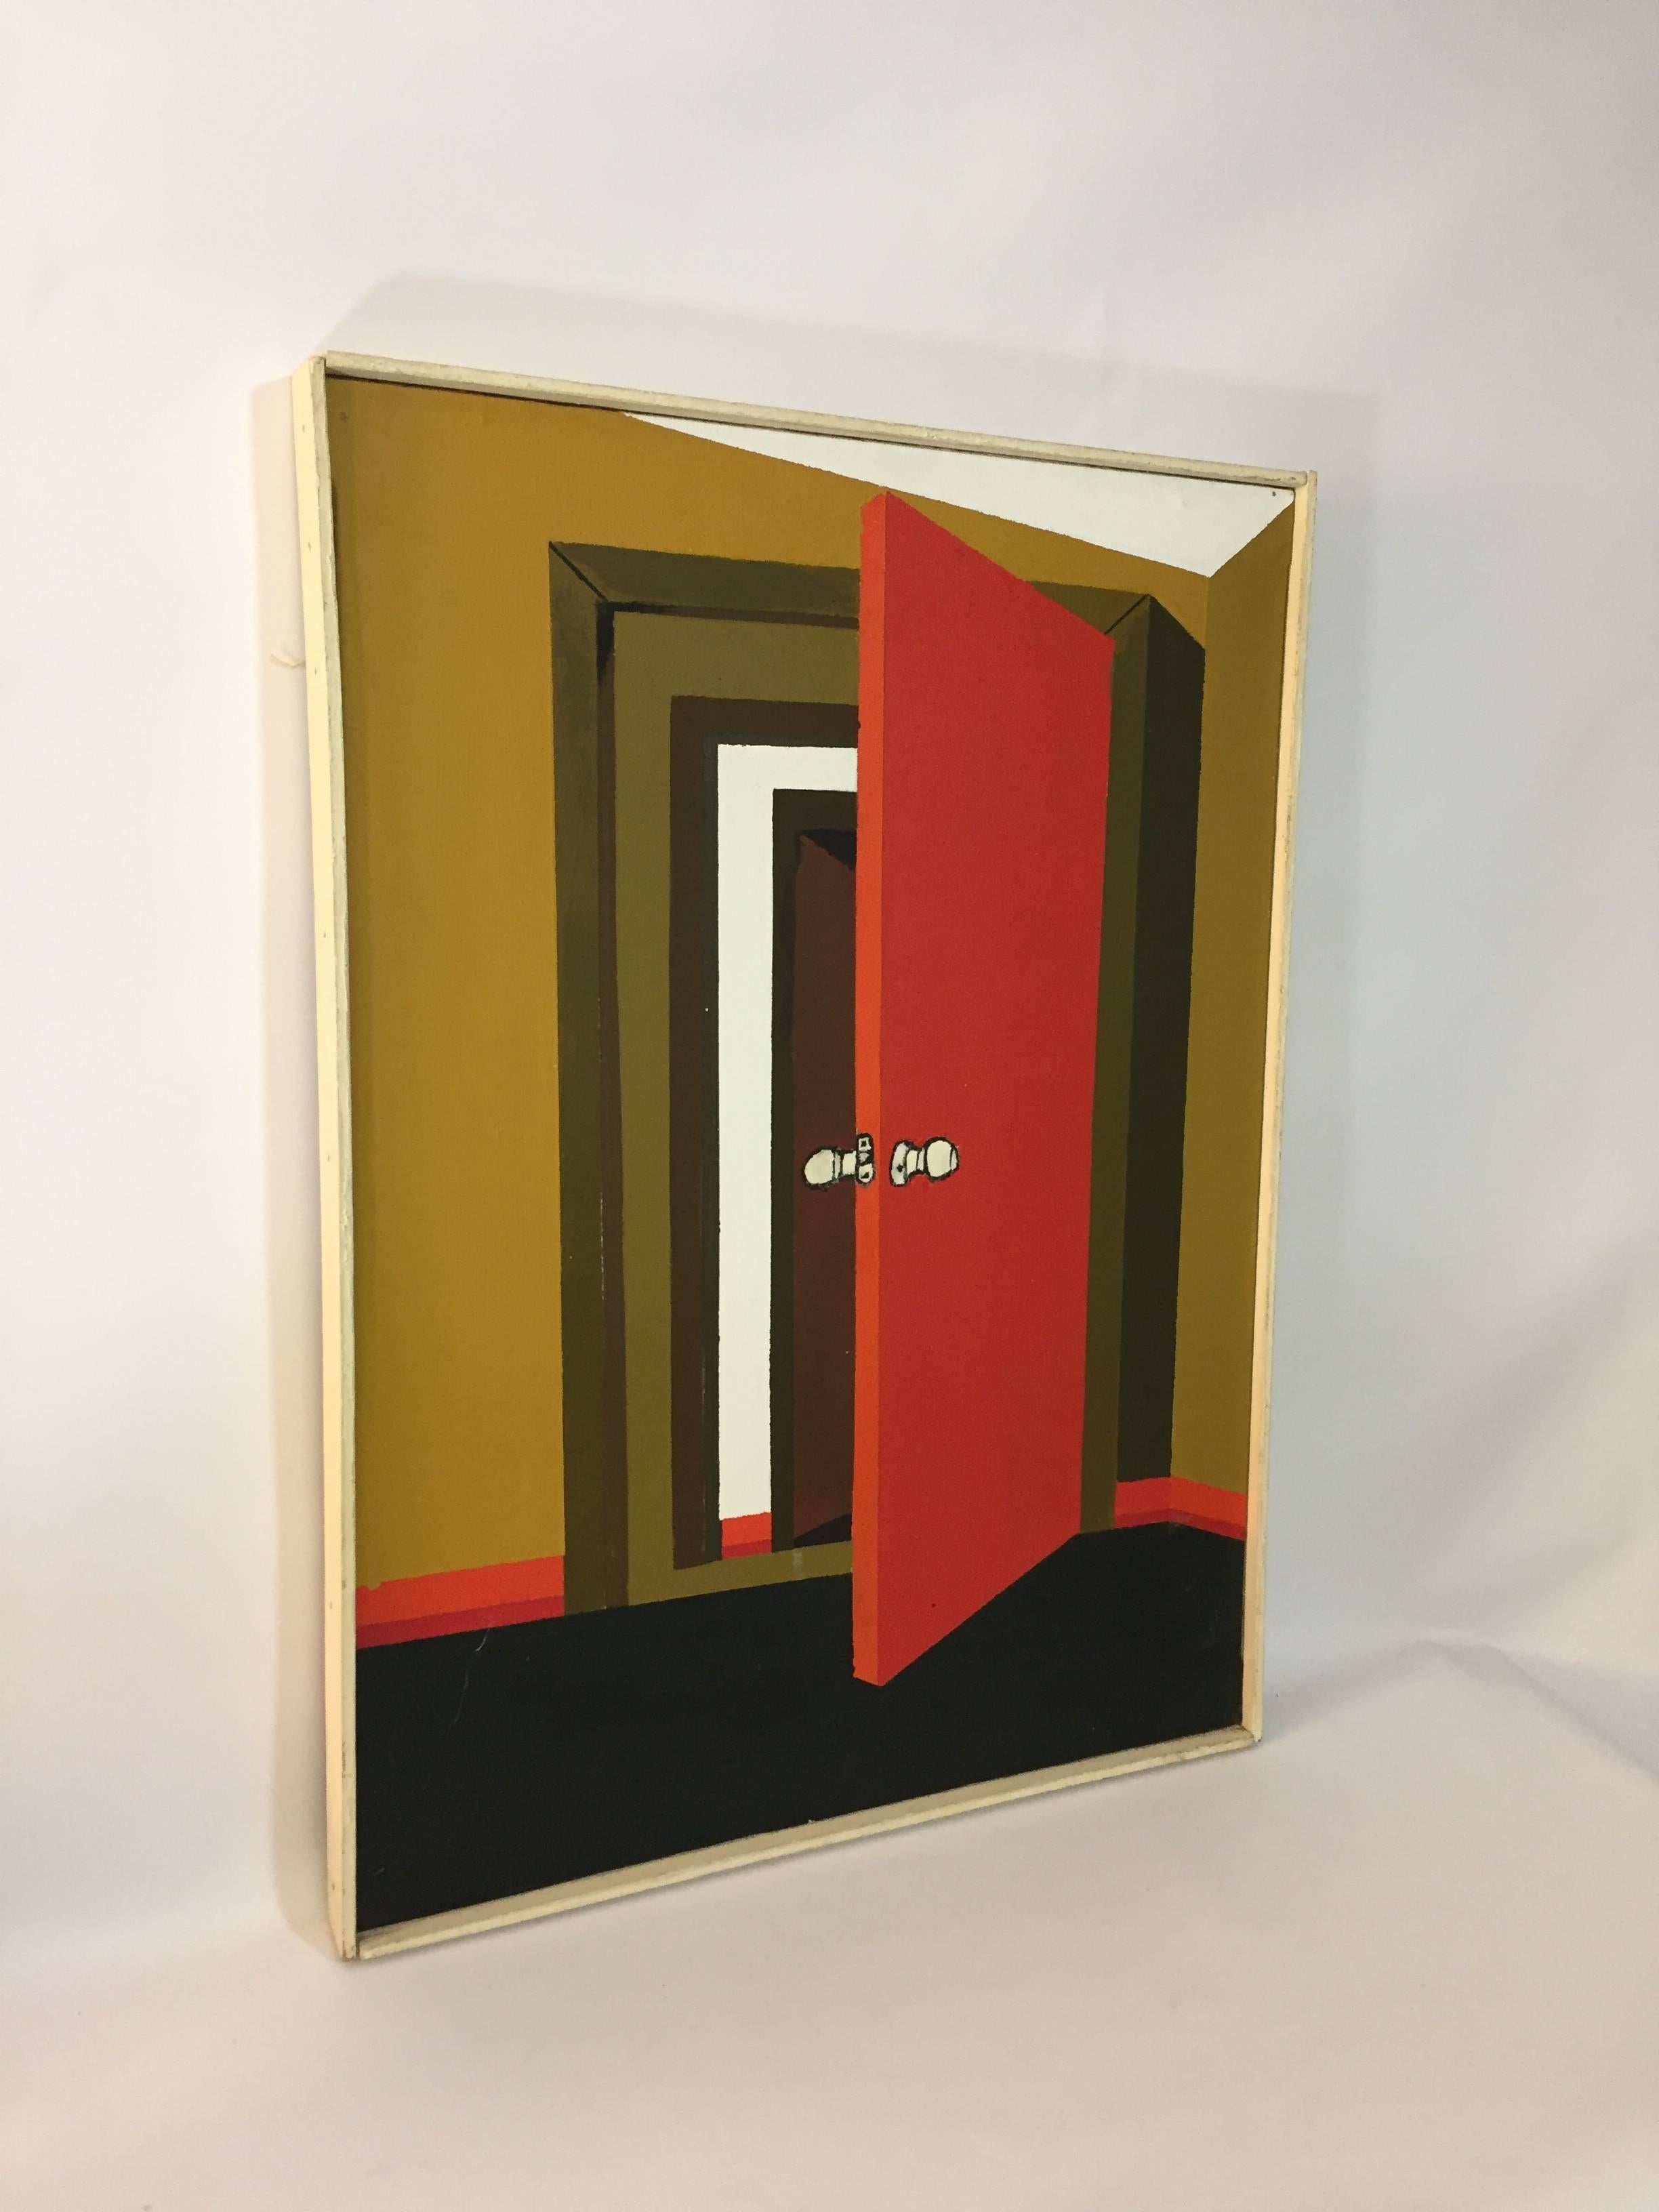 Multiple portals visually draw you into this work of art. Signed Eric Rosedale twice on wood stretcher, circa 1970. 

Framing treatment consists of a simple flat profile molding painted white. Canvas measures 20